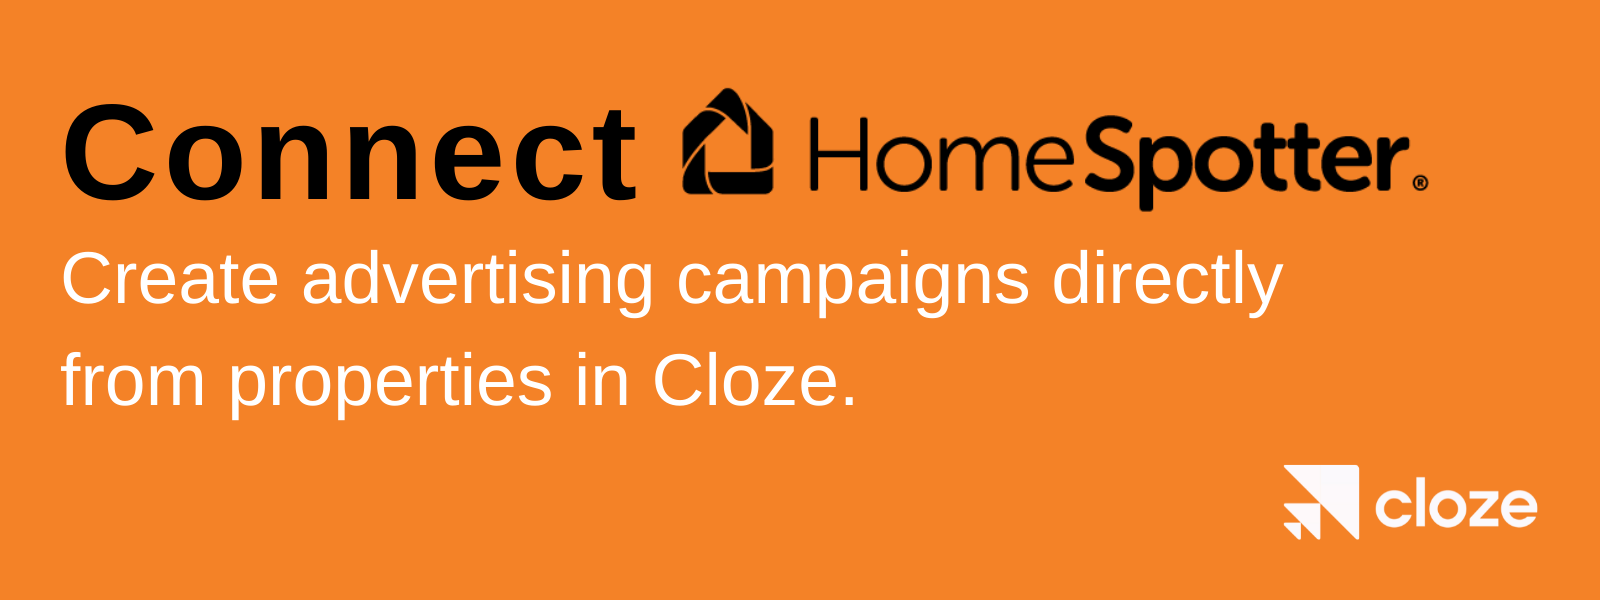 Connect HomeSpotter to create advertising campaigns directly from properties in Cloze.